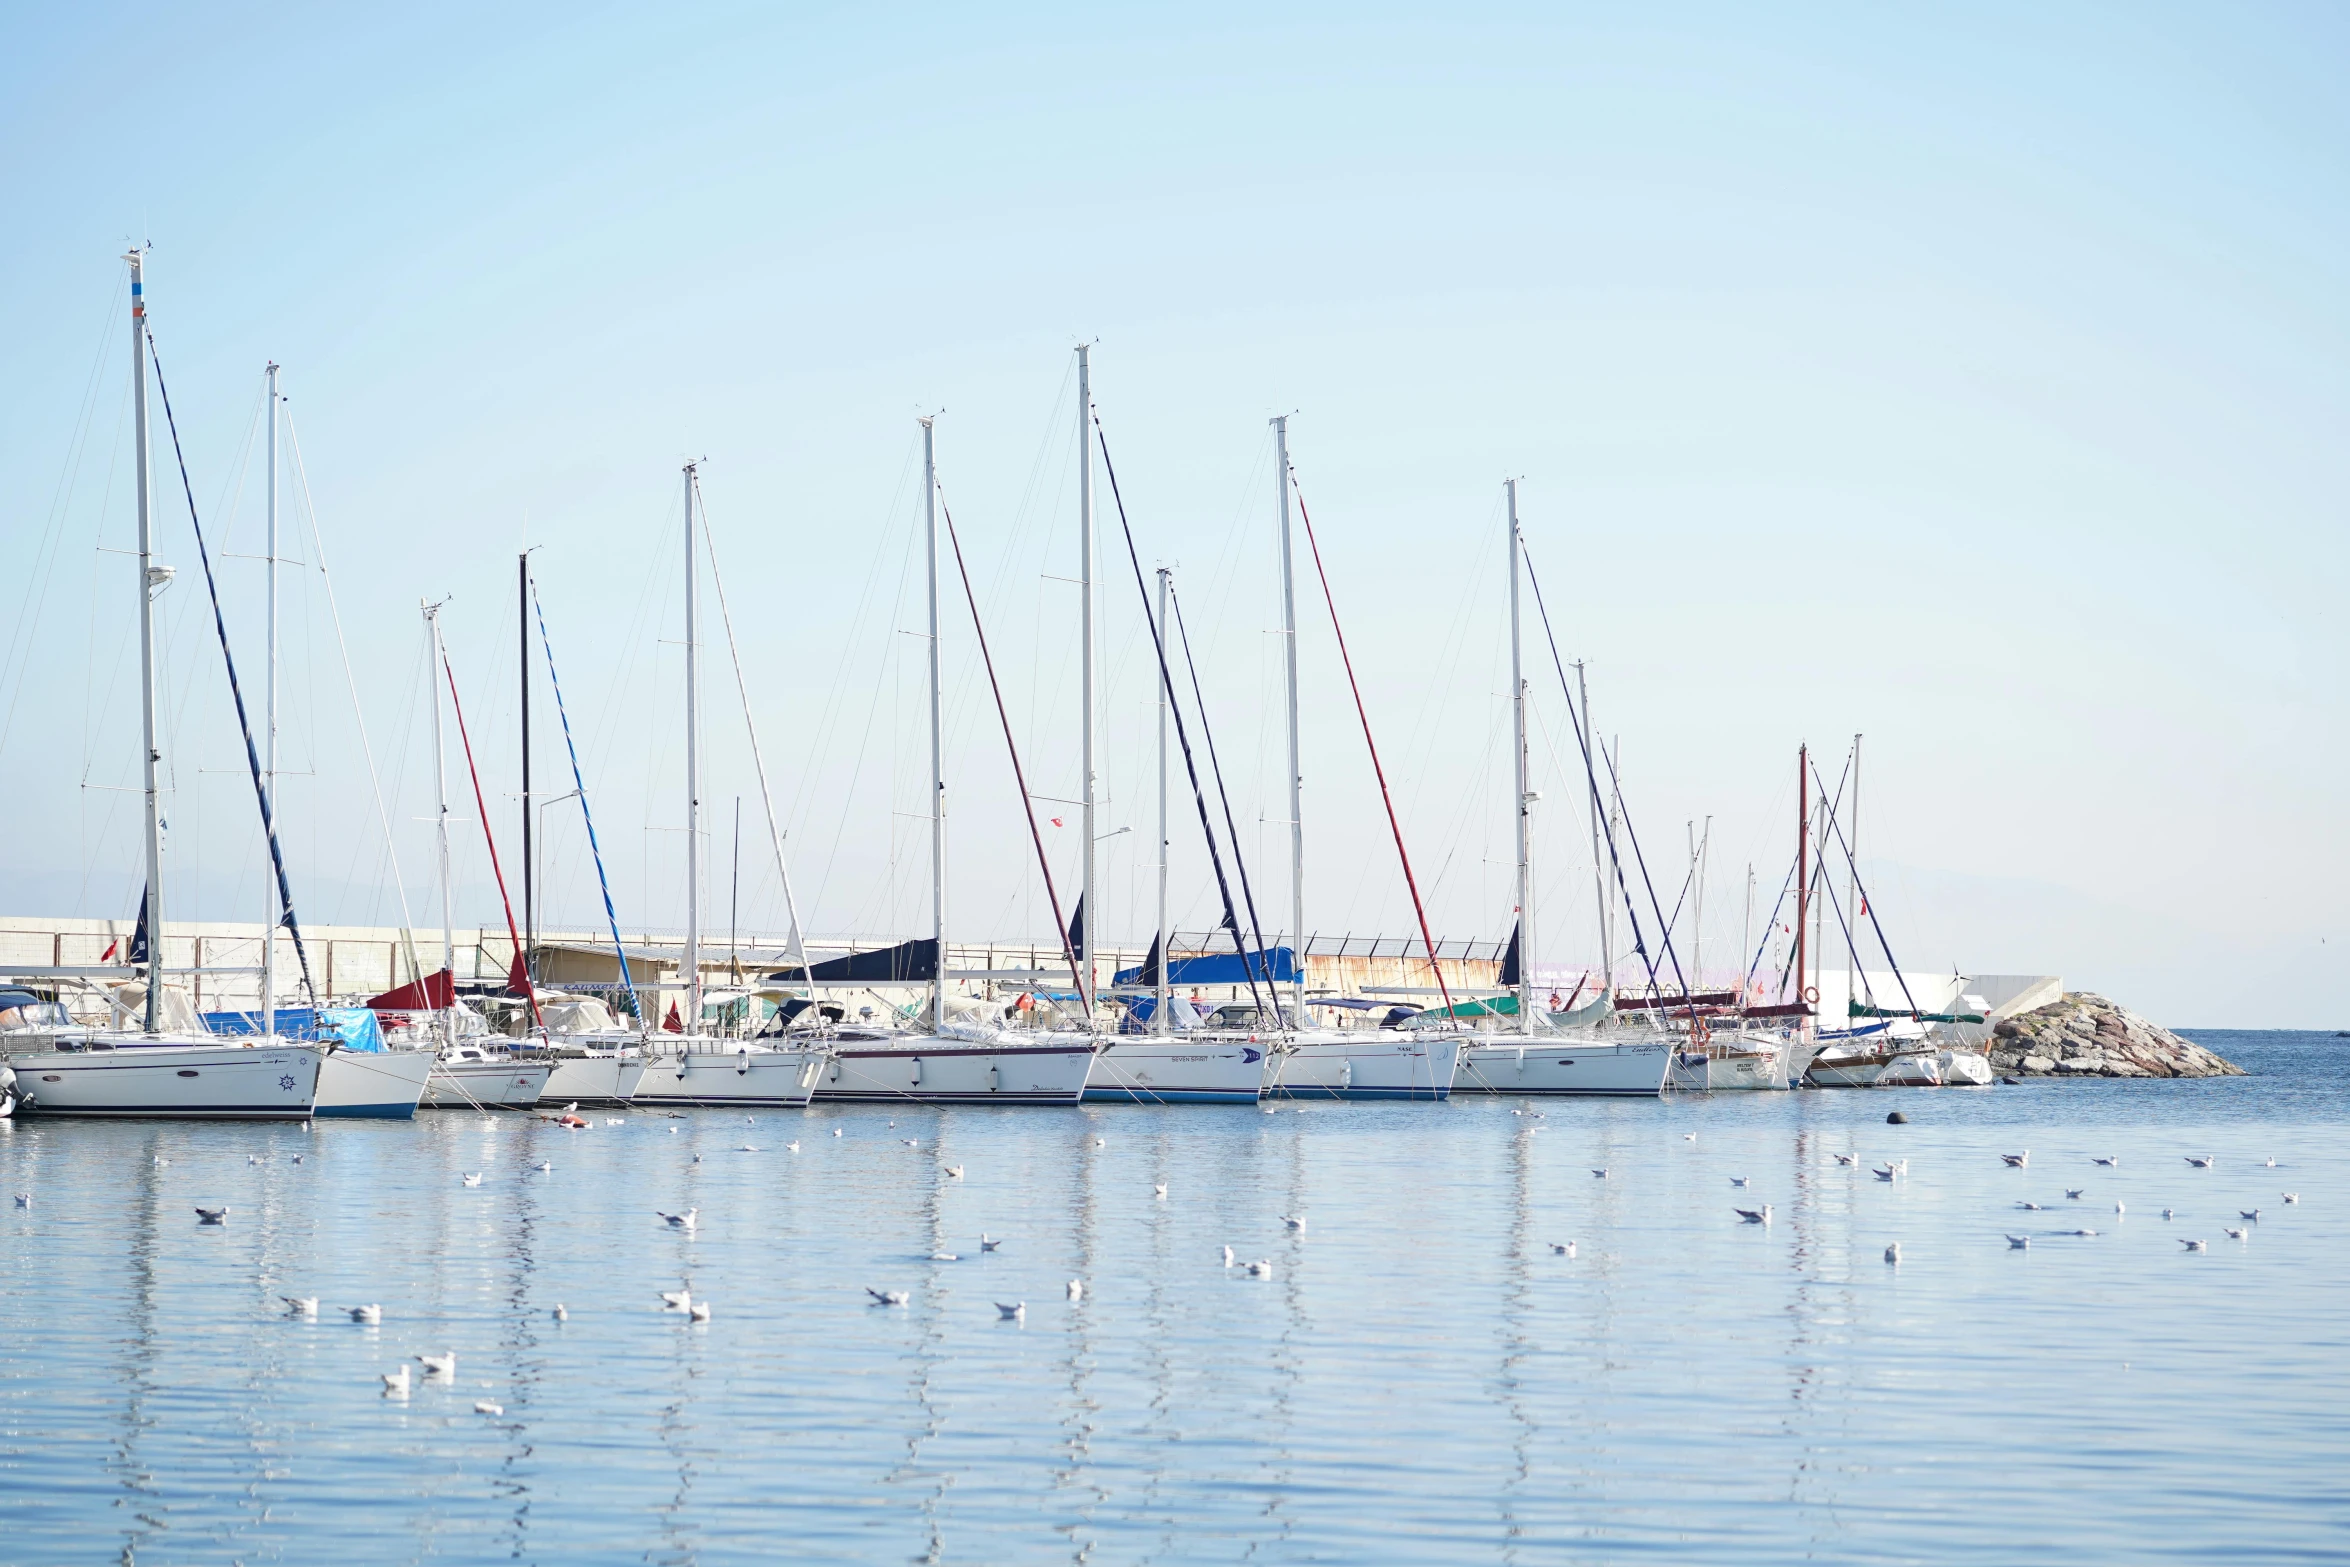 a number of boats in a body of water, pexels contest winner, les nabis, white cyc, slightly sunny, split near the left, moored